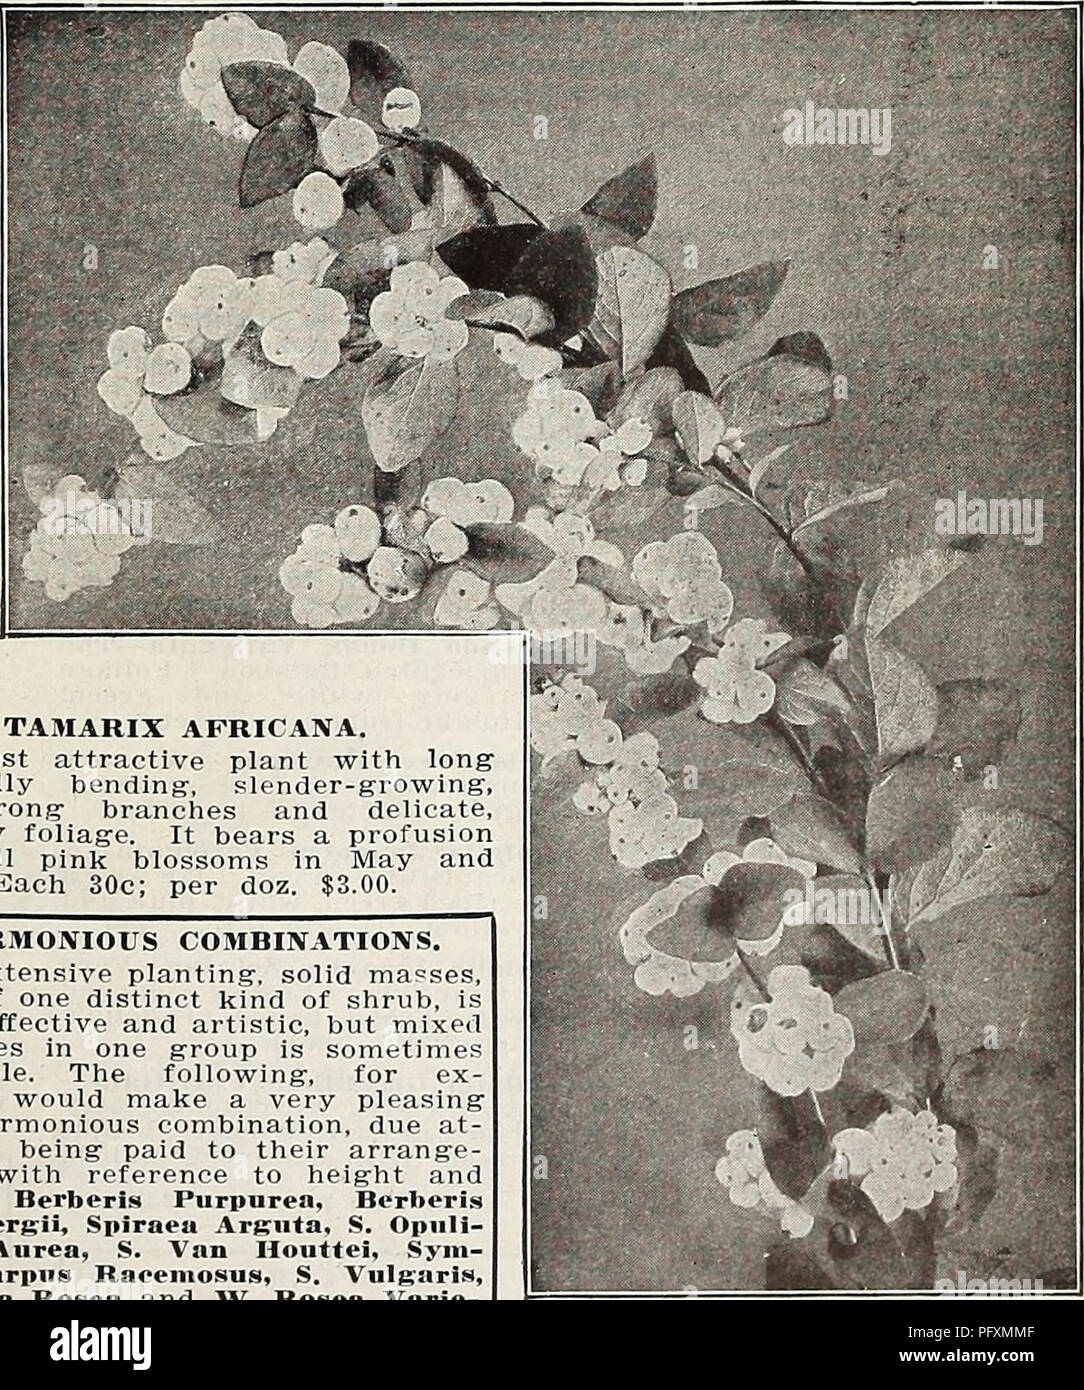 . Currie's farm and garden annual : spring 1914. Flowers Seeds Catalogs; Bulbs (Plants) Seeds Catalogs; Vegetables Seeds Catalogs; Nurseries (Horticulture) Catalogs; Plants, Ornamental Catalogs; Gardening Equipment and supplies Catalogs. TAMARIX AFRICANA. A most attractive plant with Ion gracefully bending, slender-growing, but strong- branches and delicate, feathery foliage. It bears a profusion of small pink blossoms in May and June. Each 30c; per doz. $3.00. HARMONIOUS COMBINATIONS. In extensive planting, solid masses, each of one distinct kind of shrub, is most effective and artistic, but  Stock Photo